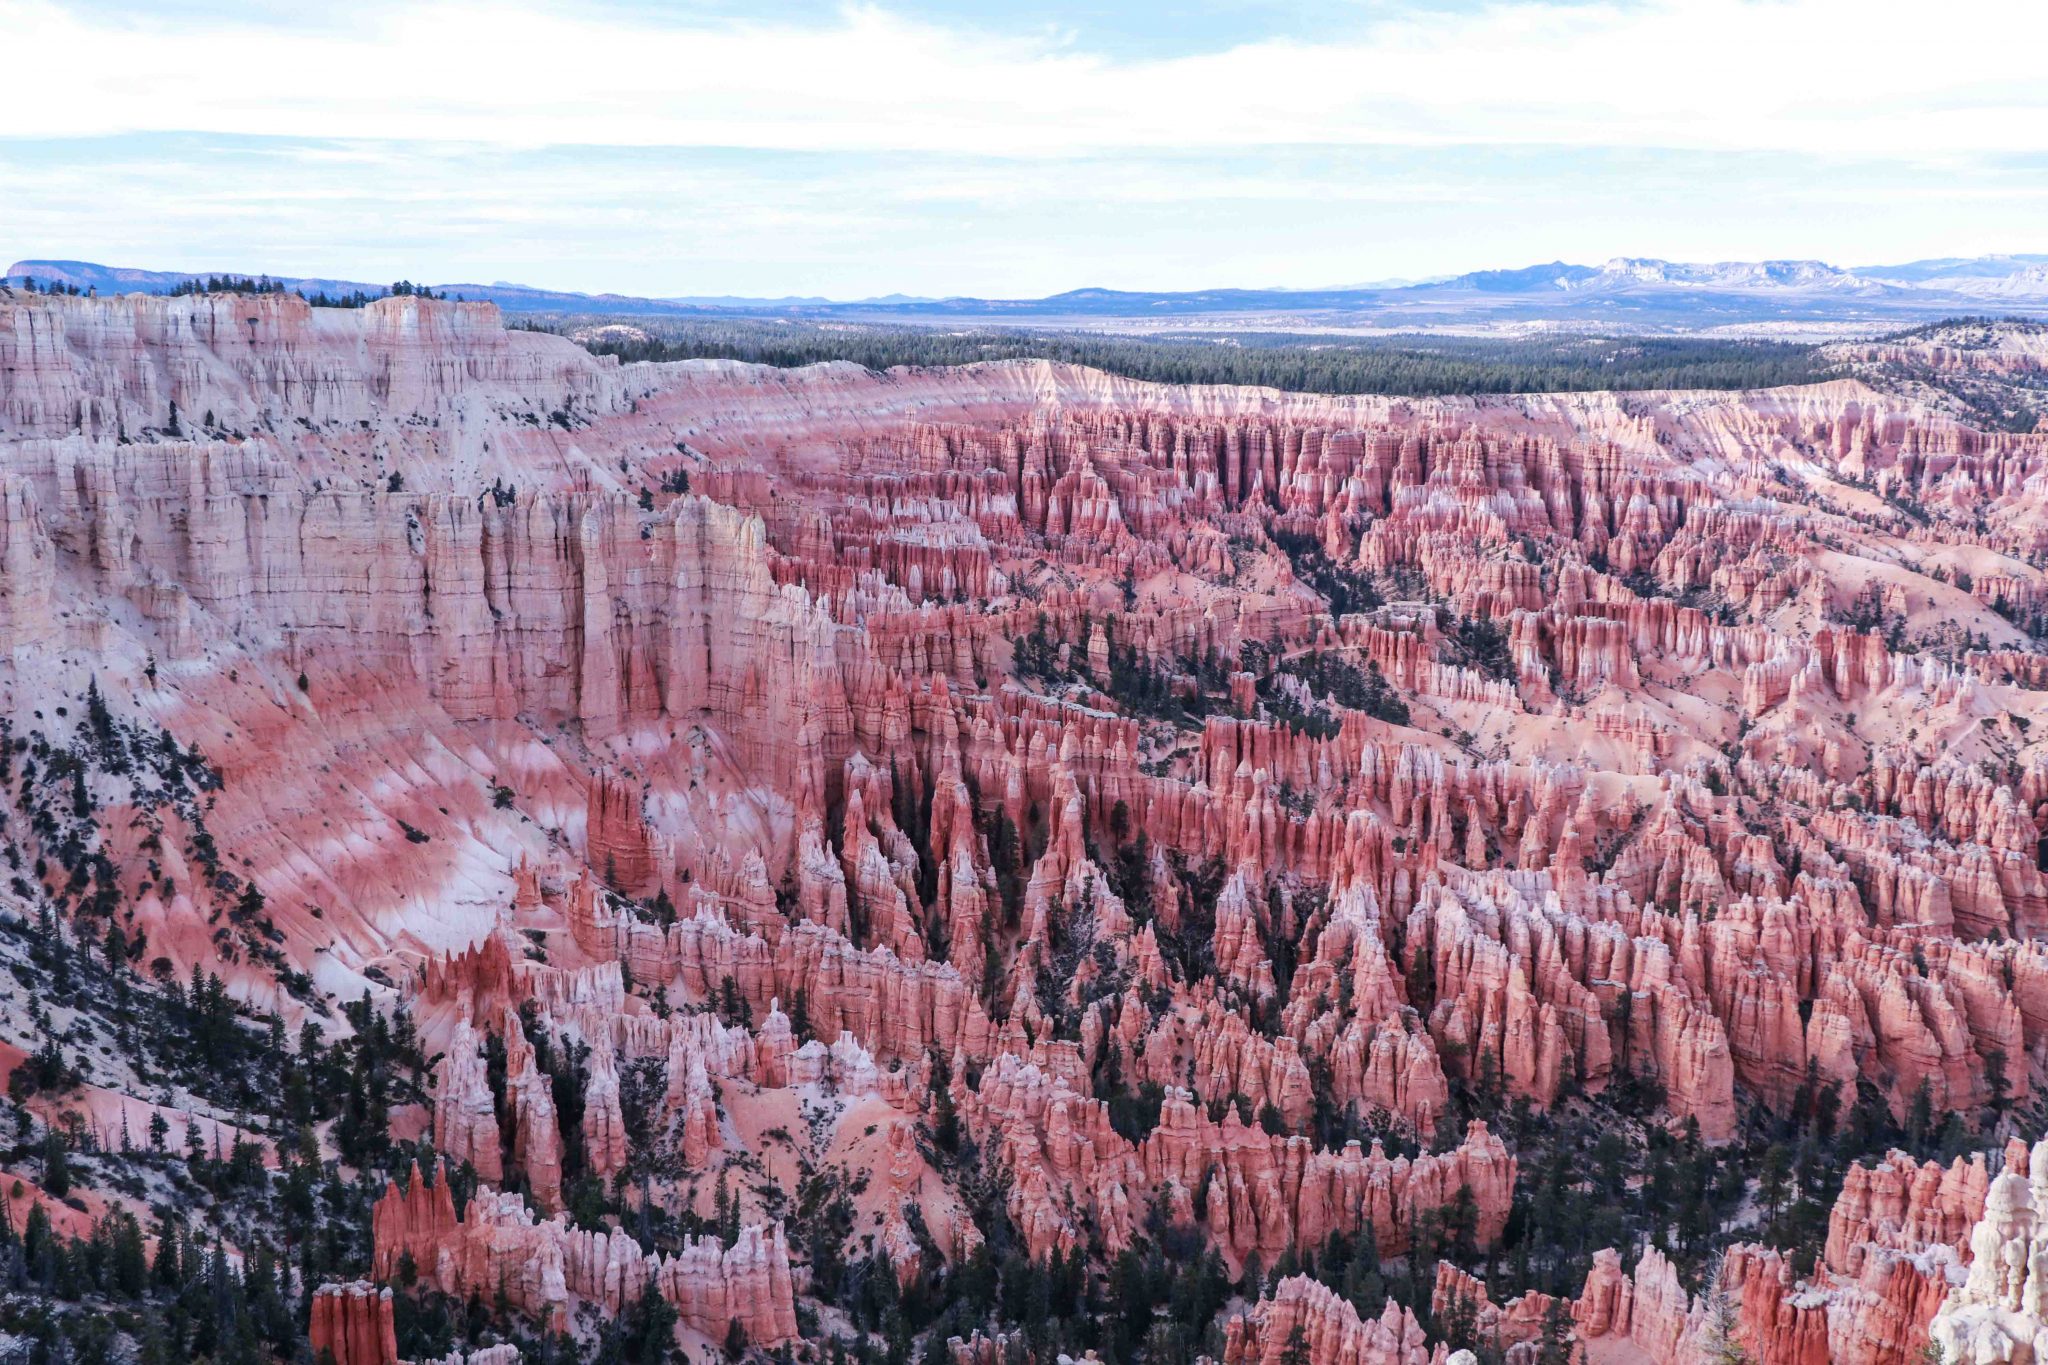 Bryce Canyon - From Las Vegas to Moab: 5 tips for your road trip: Bryce Canyon, Arches National Park, Canyonlands national park